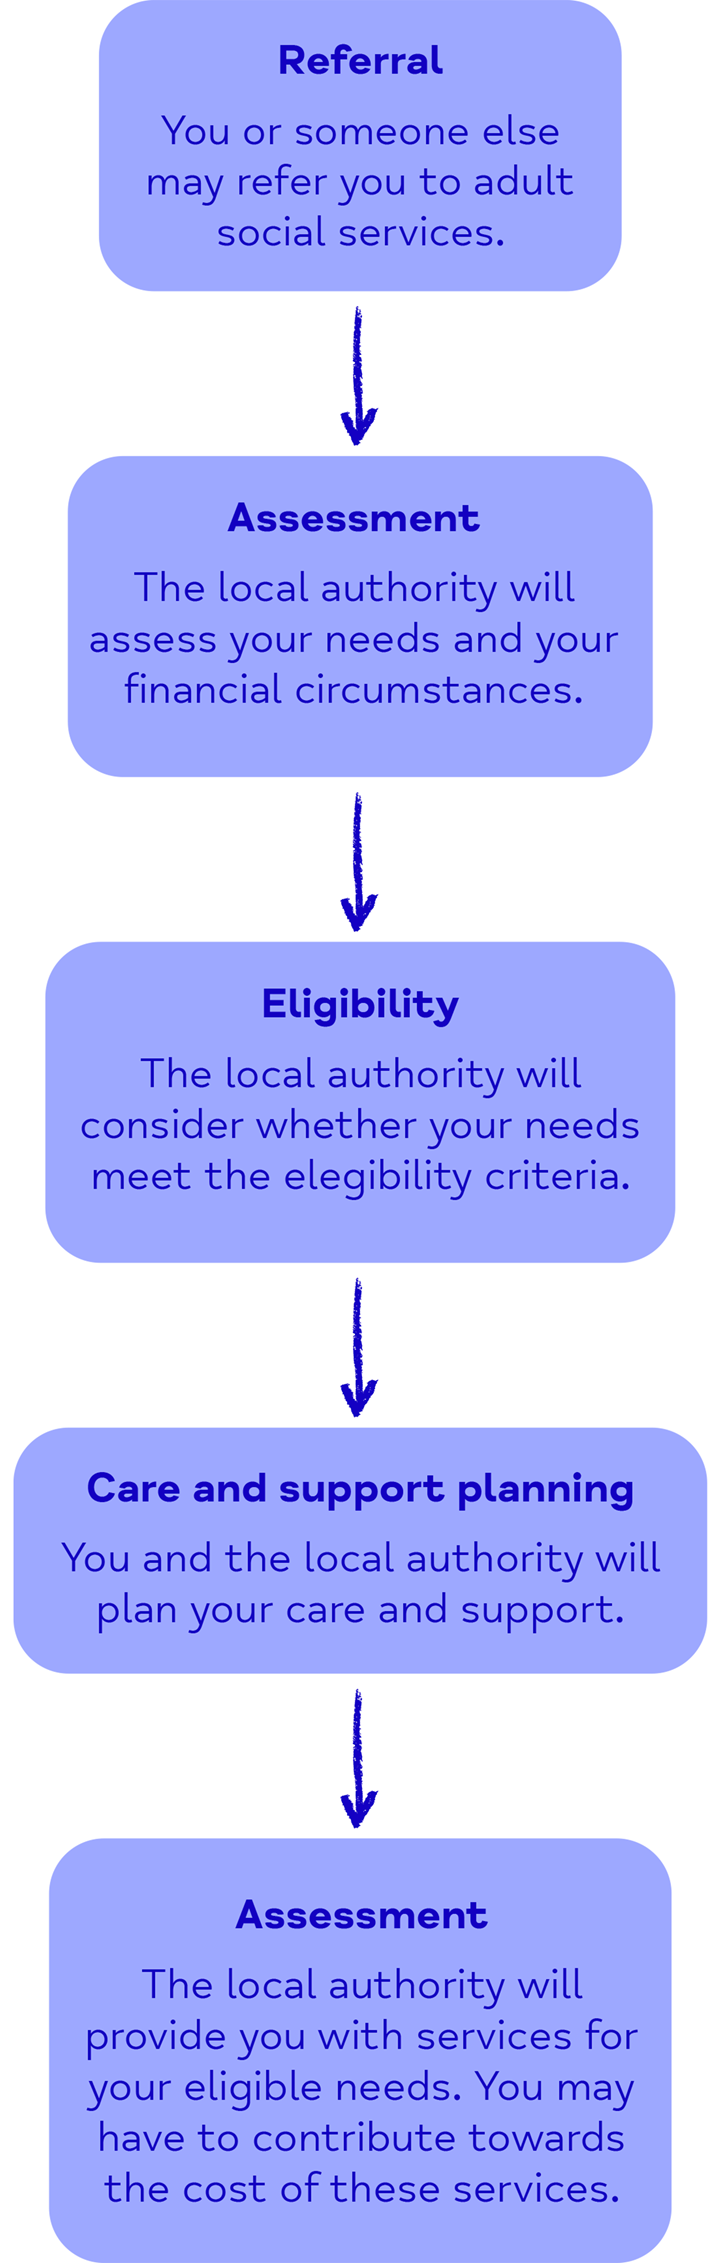 Flowchart showing how to access social care, as described under "How do I access social care?"